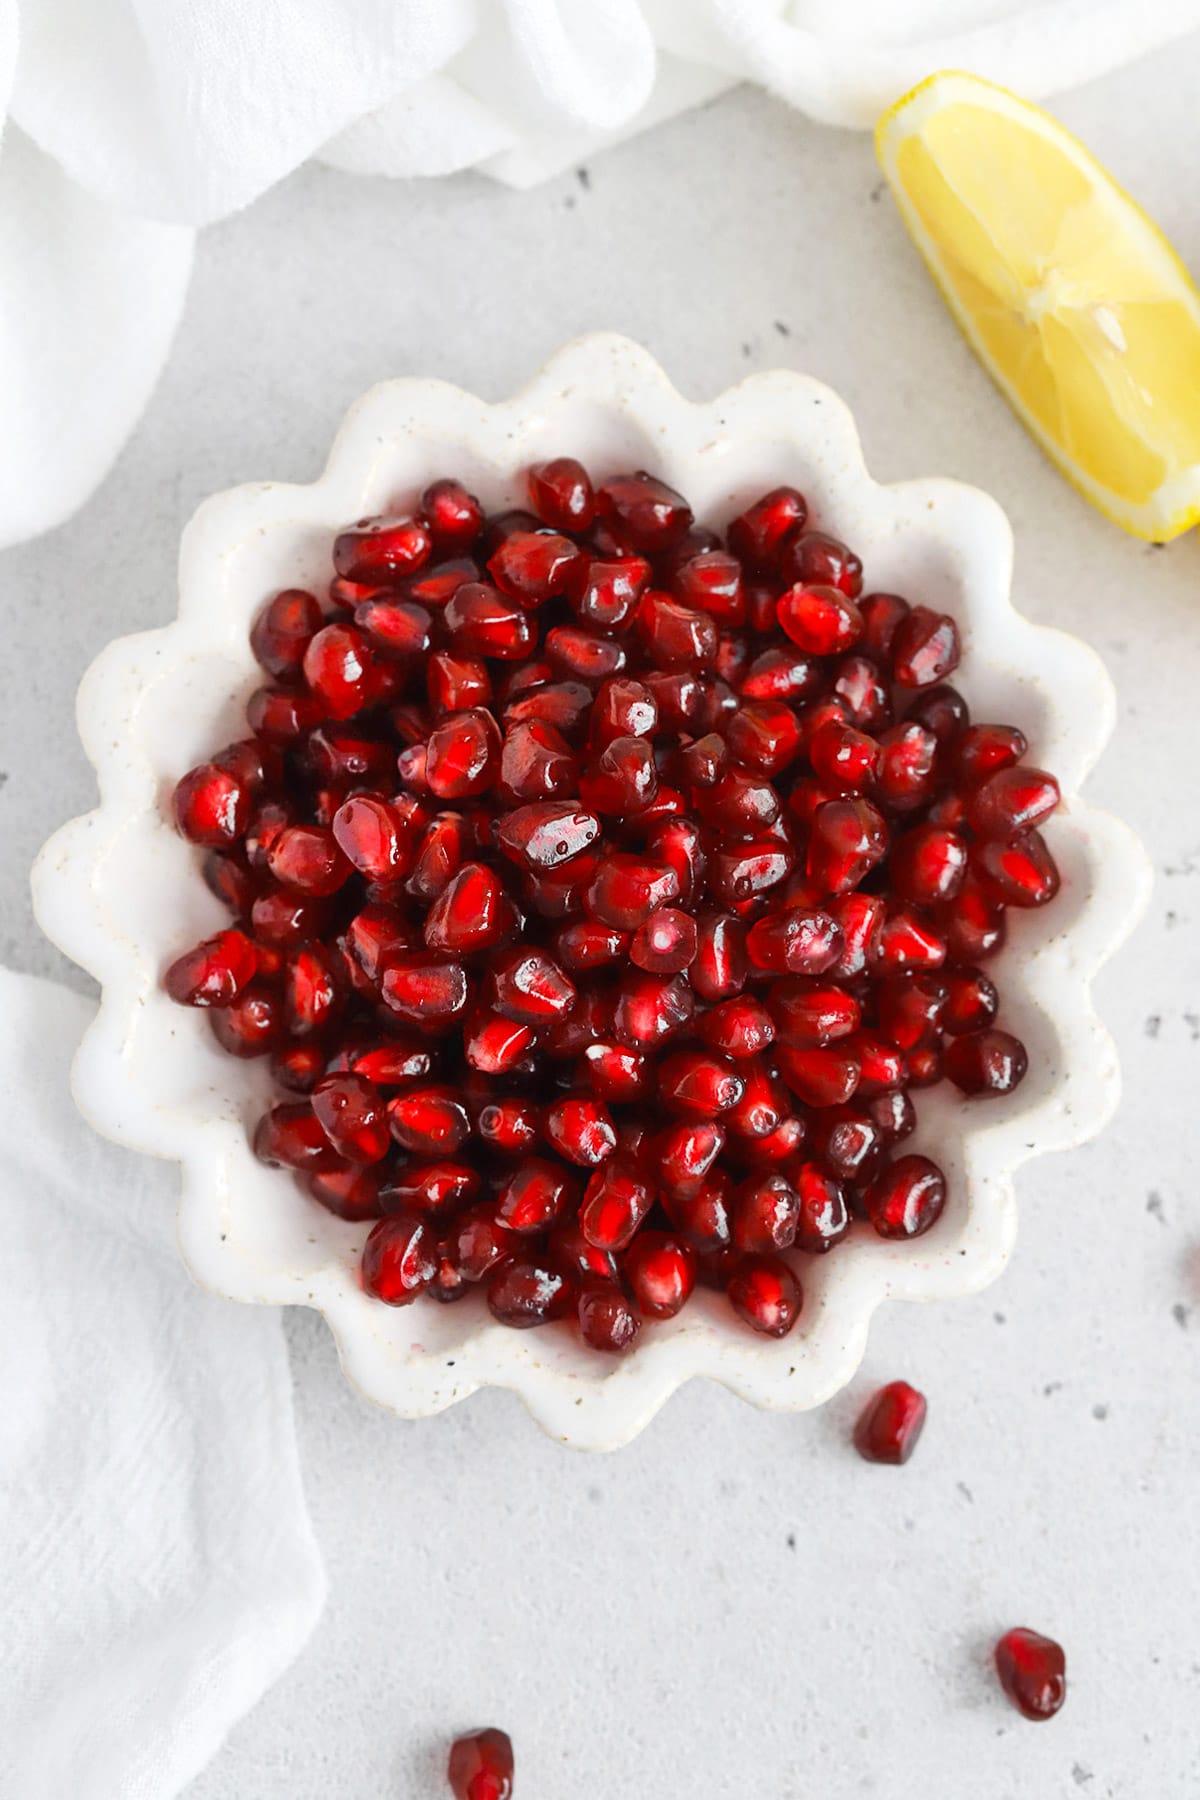 Overhead view of a ruffled white bowl of pomegranate arils